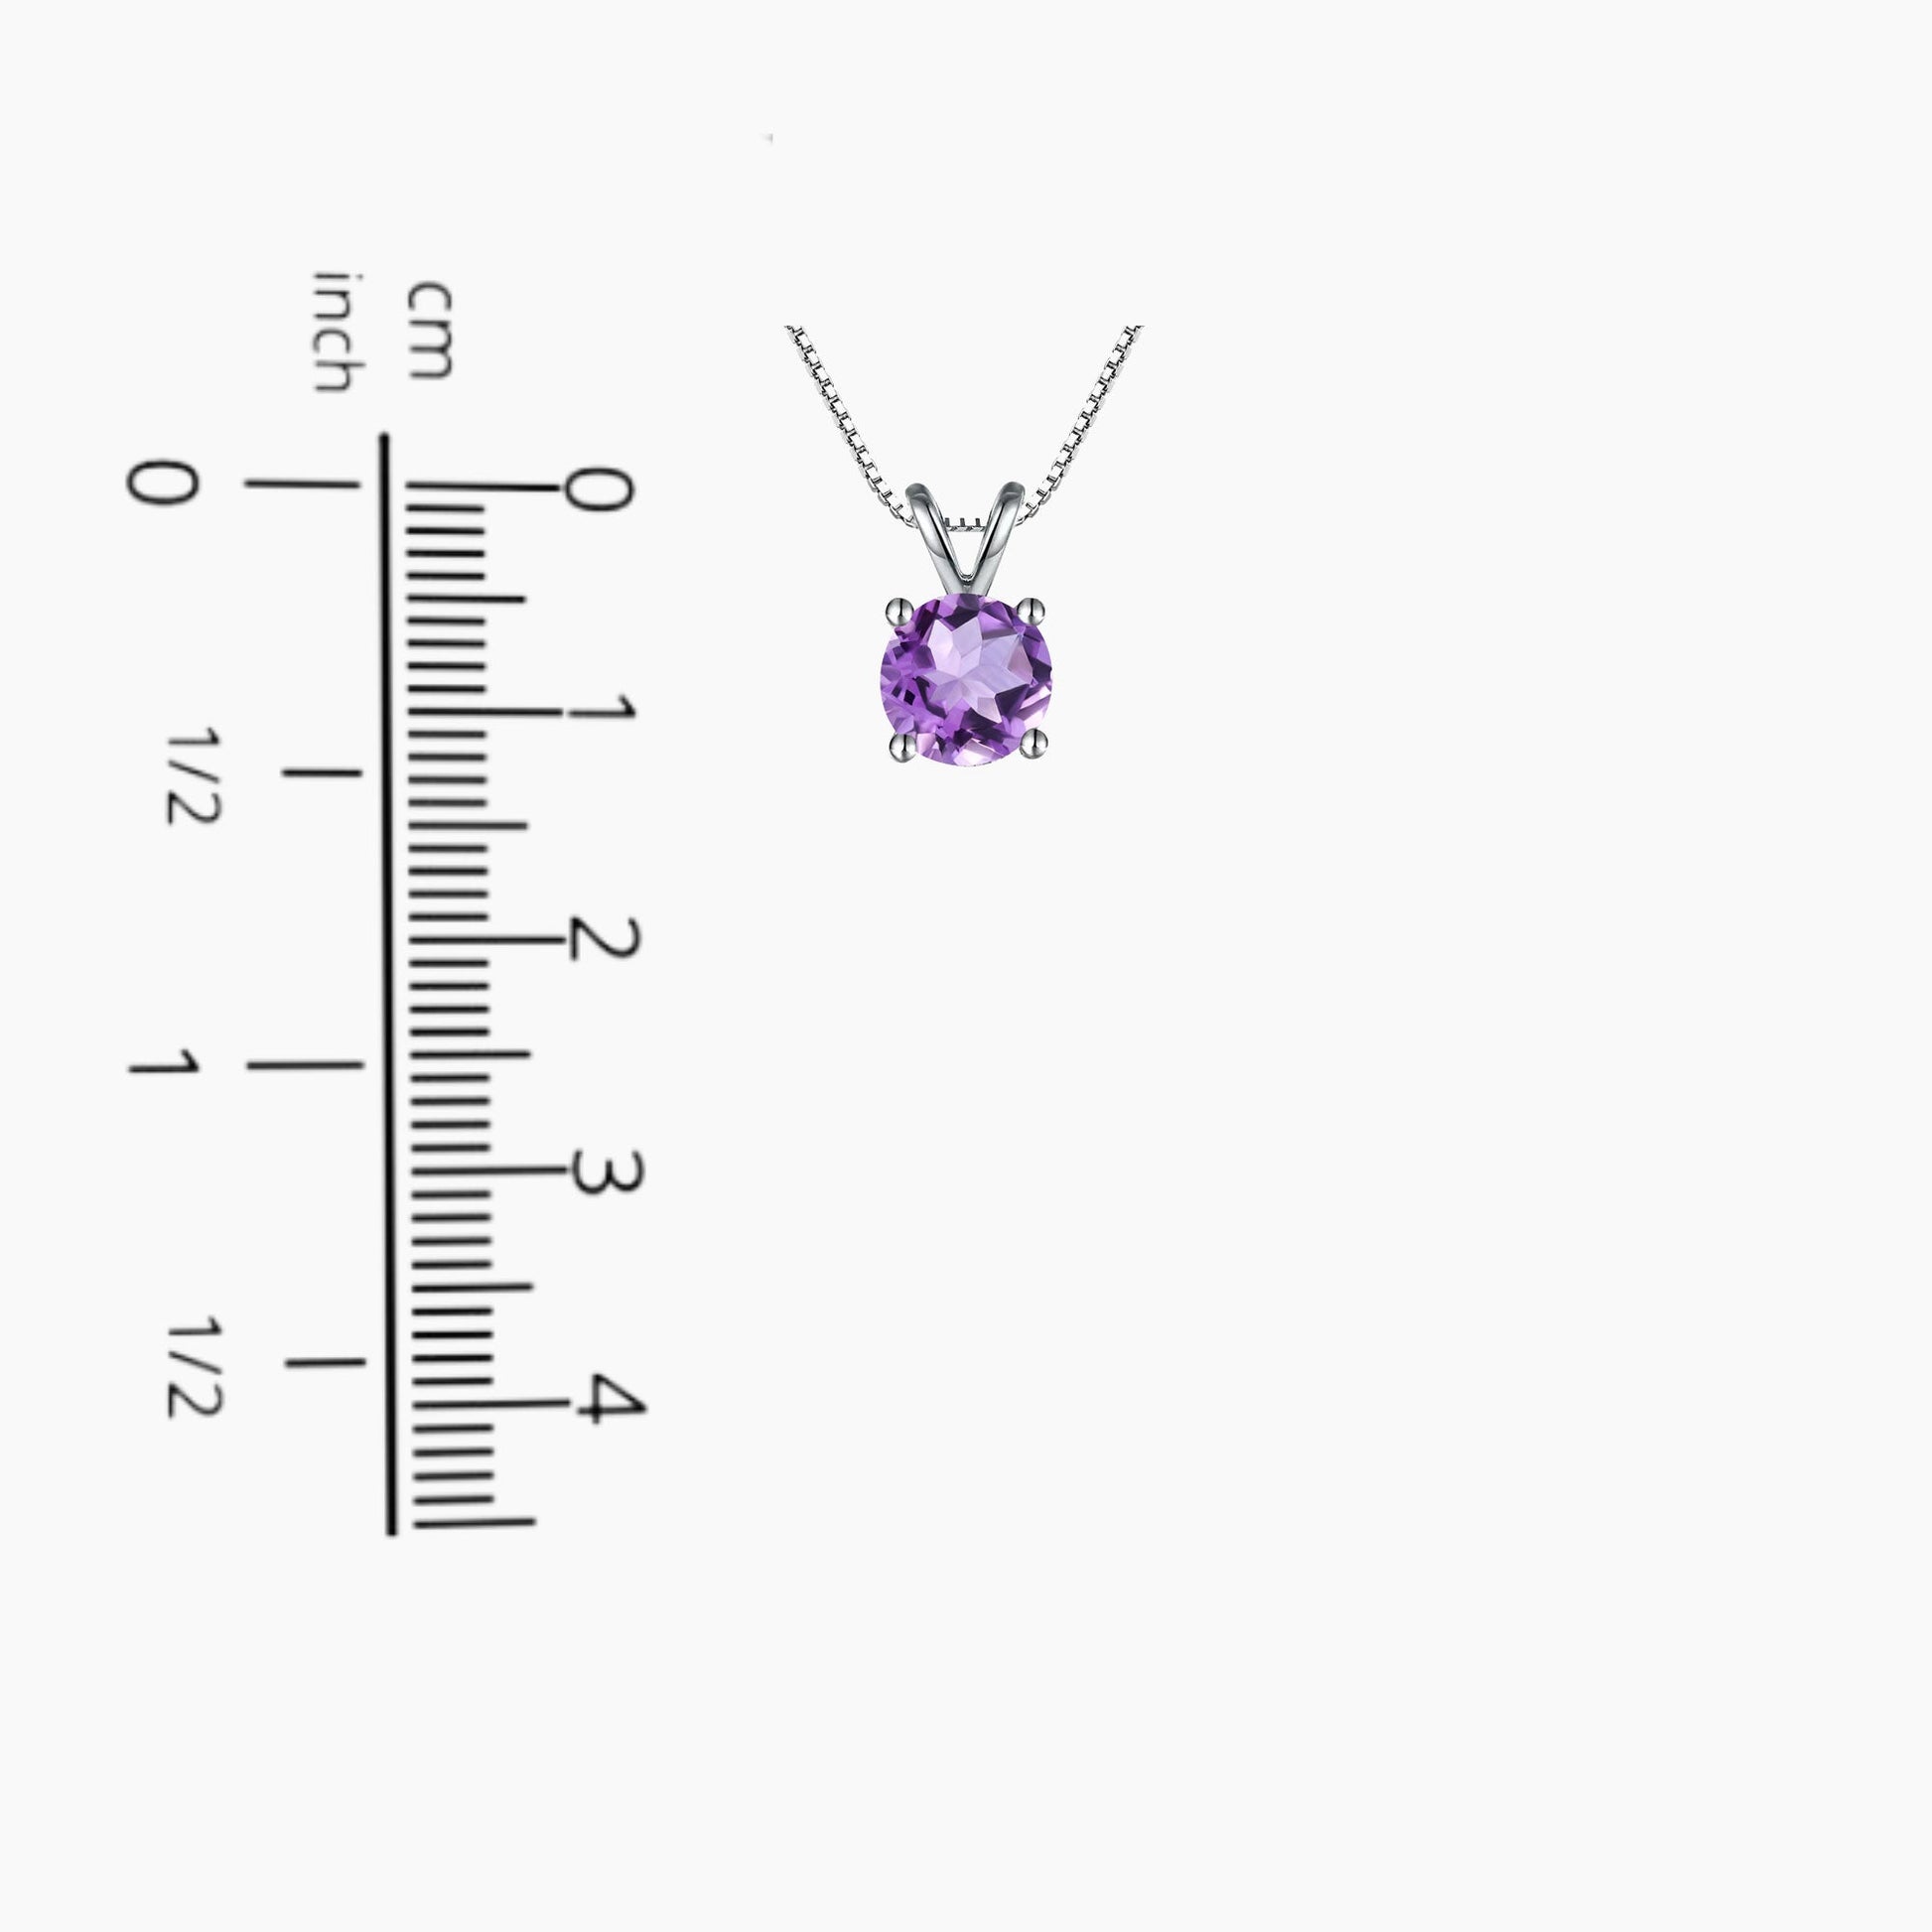 Round Shape Amethyst Pendant displayed on a scale, providing an accurate representation of its size and dimensions.